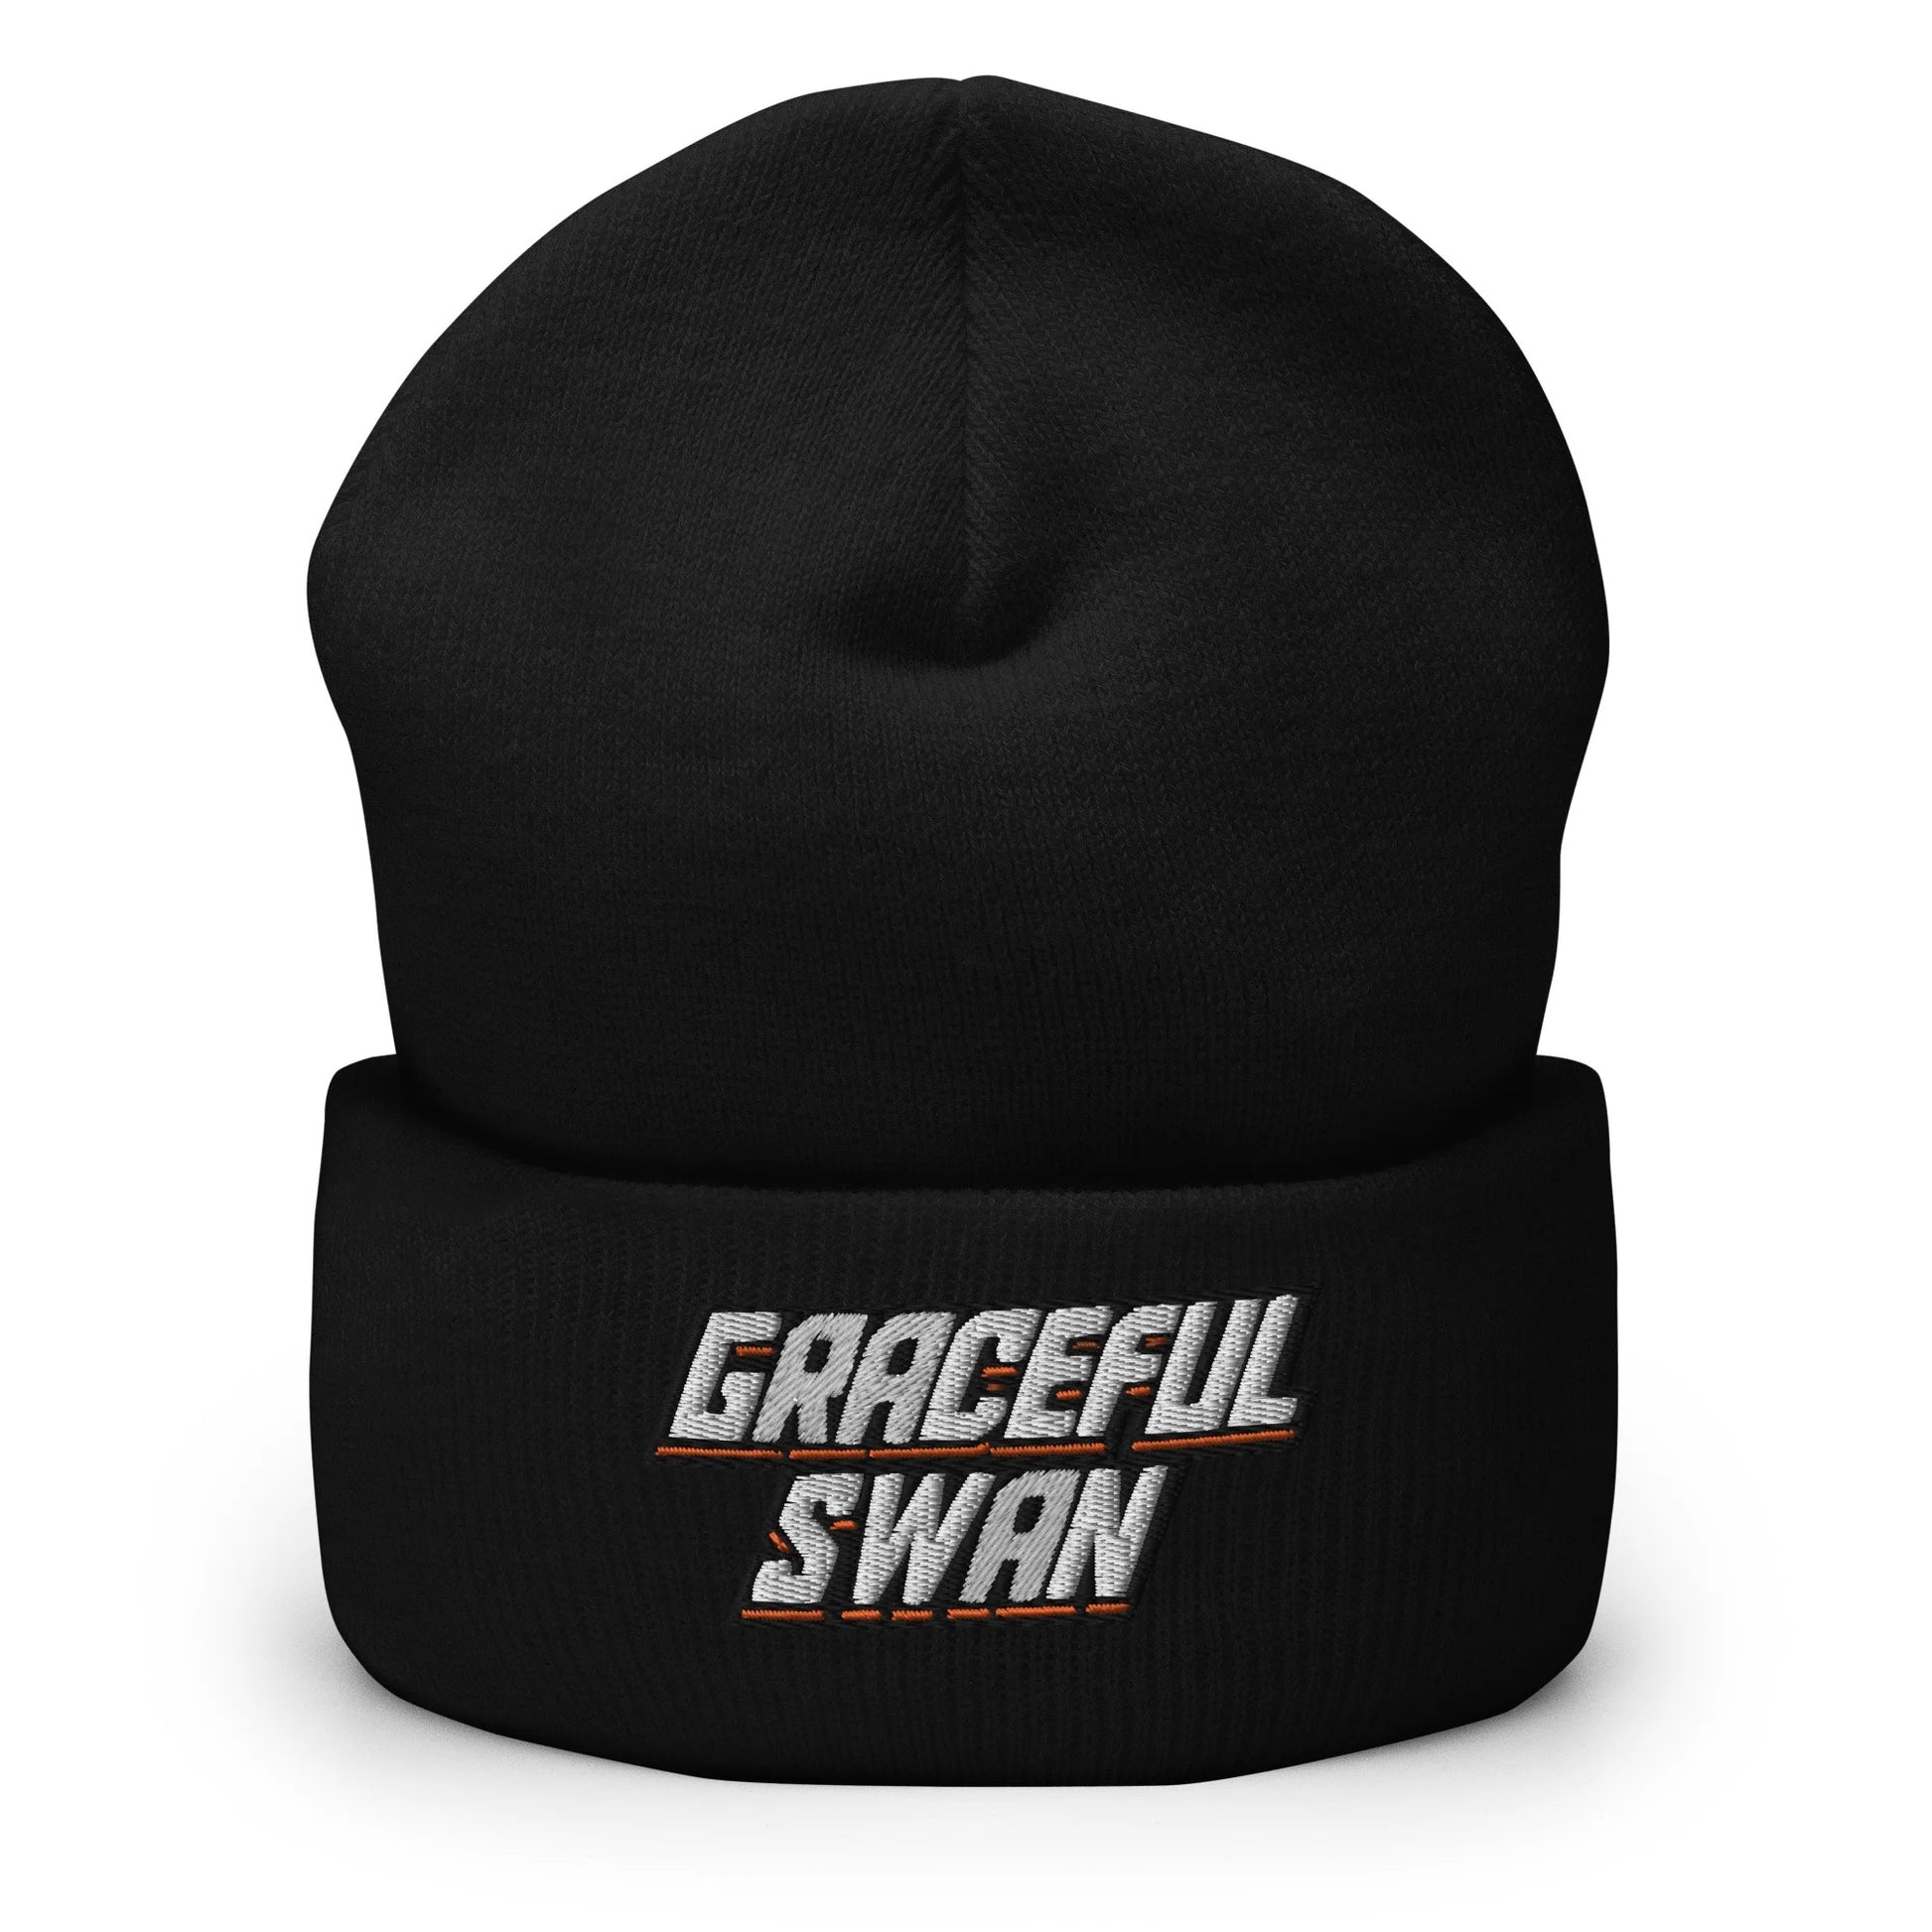 Graceful Swan Beanie by ShowZone in black with text logo